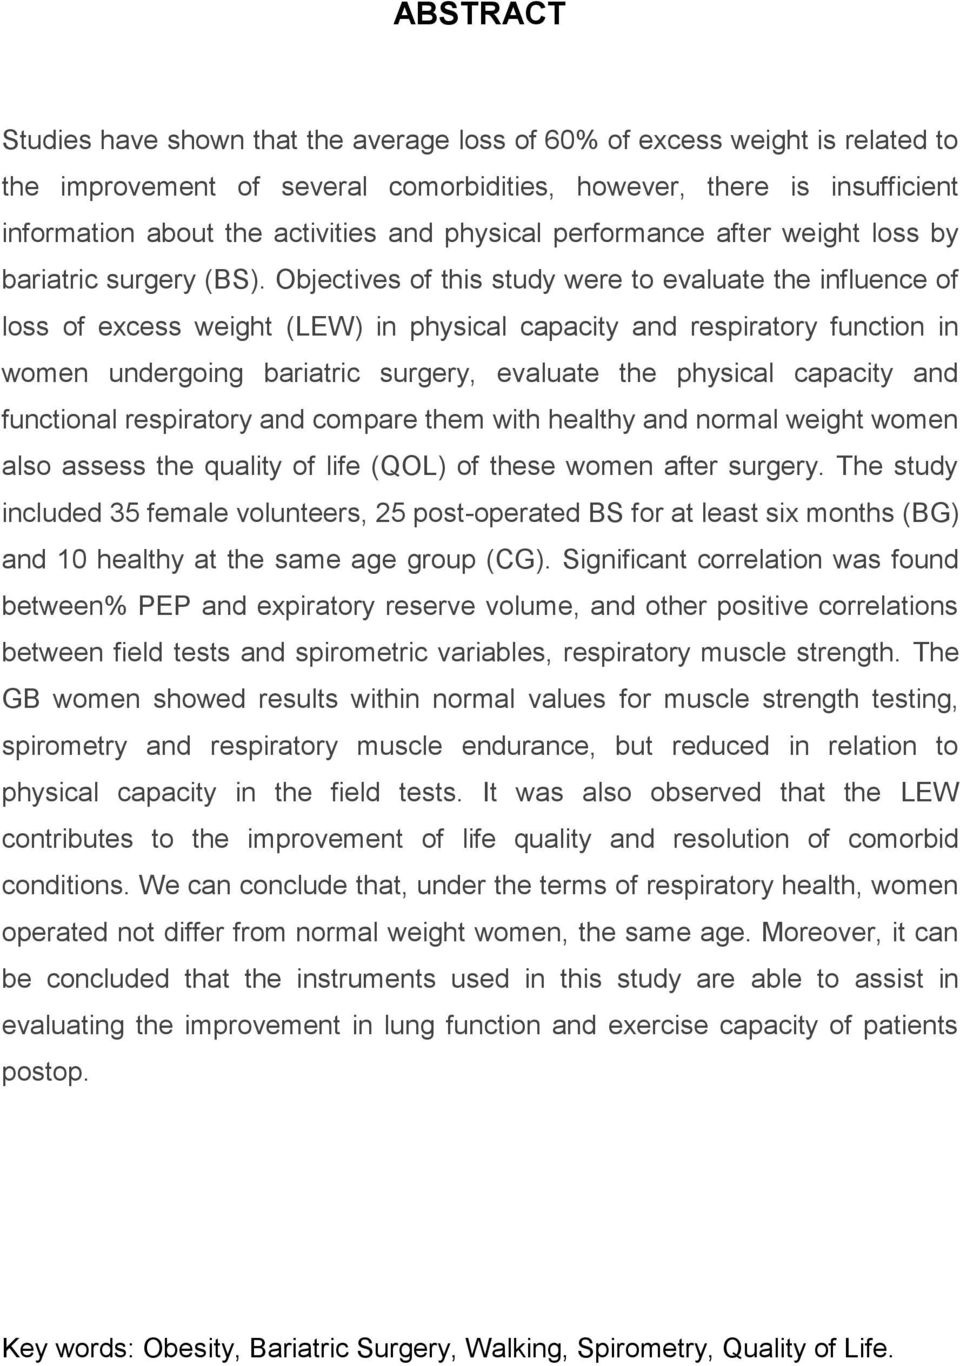 Objectives of this study were to evaluate the influence of loss of excess weight (LEW) in physical capacity and respiratory function in women undergoing bariatric surgery, evaluate the physical